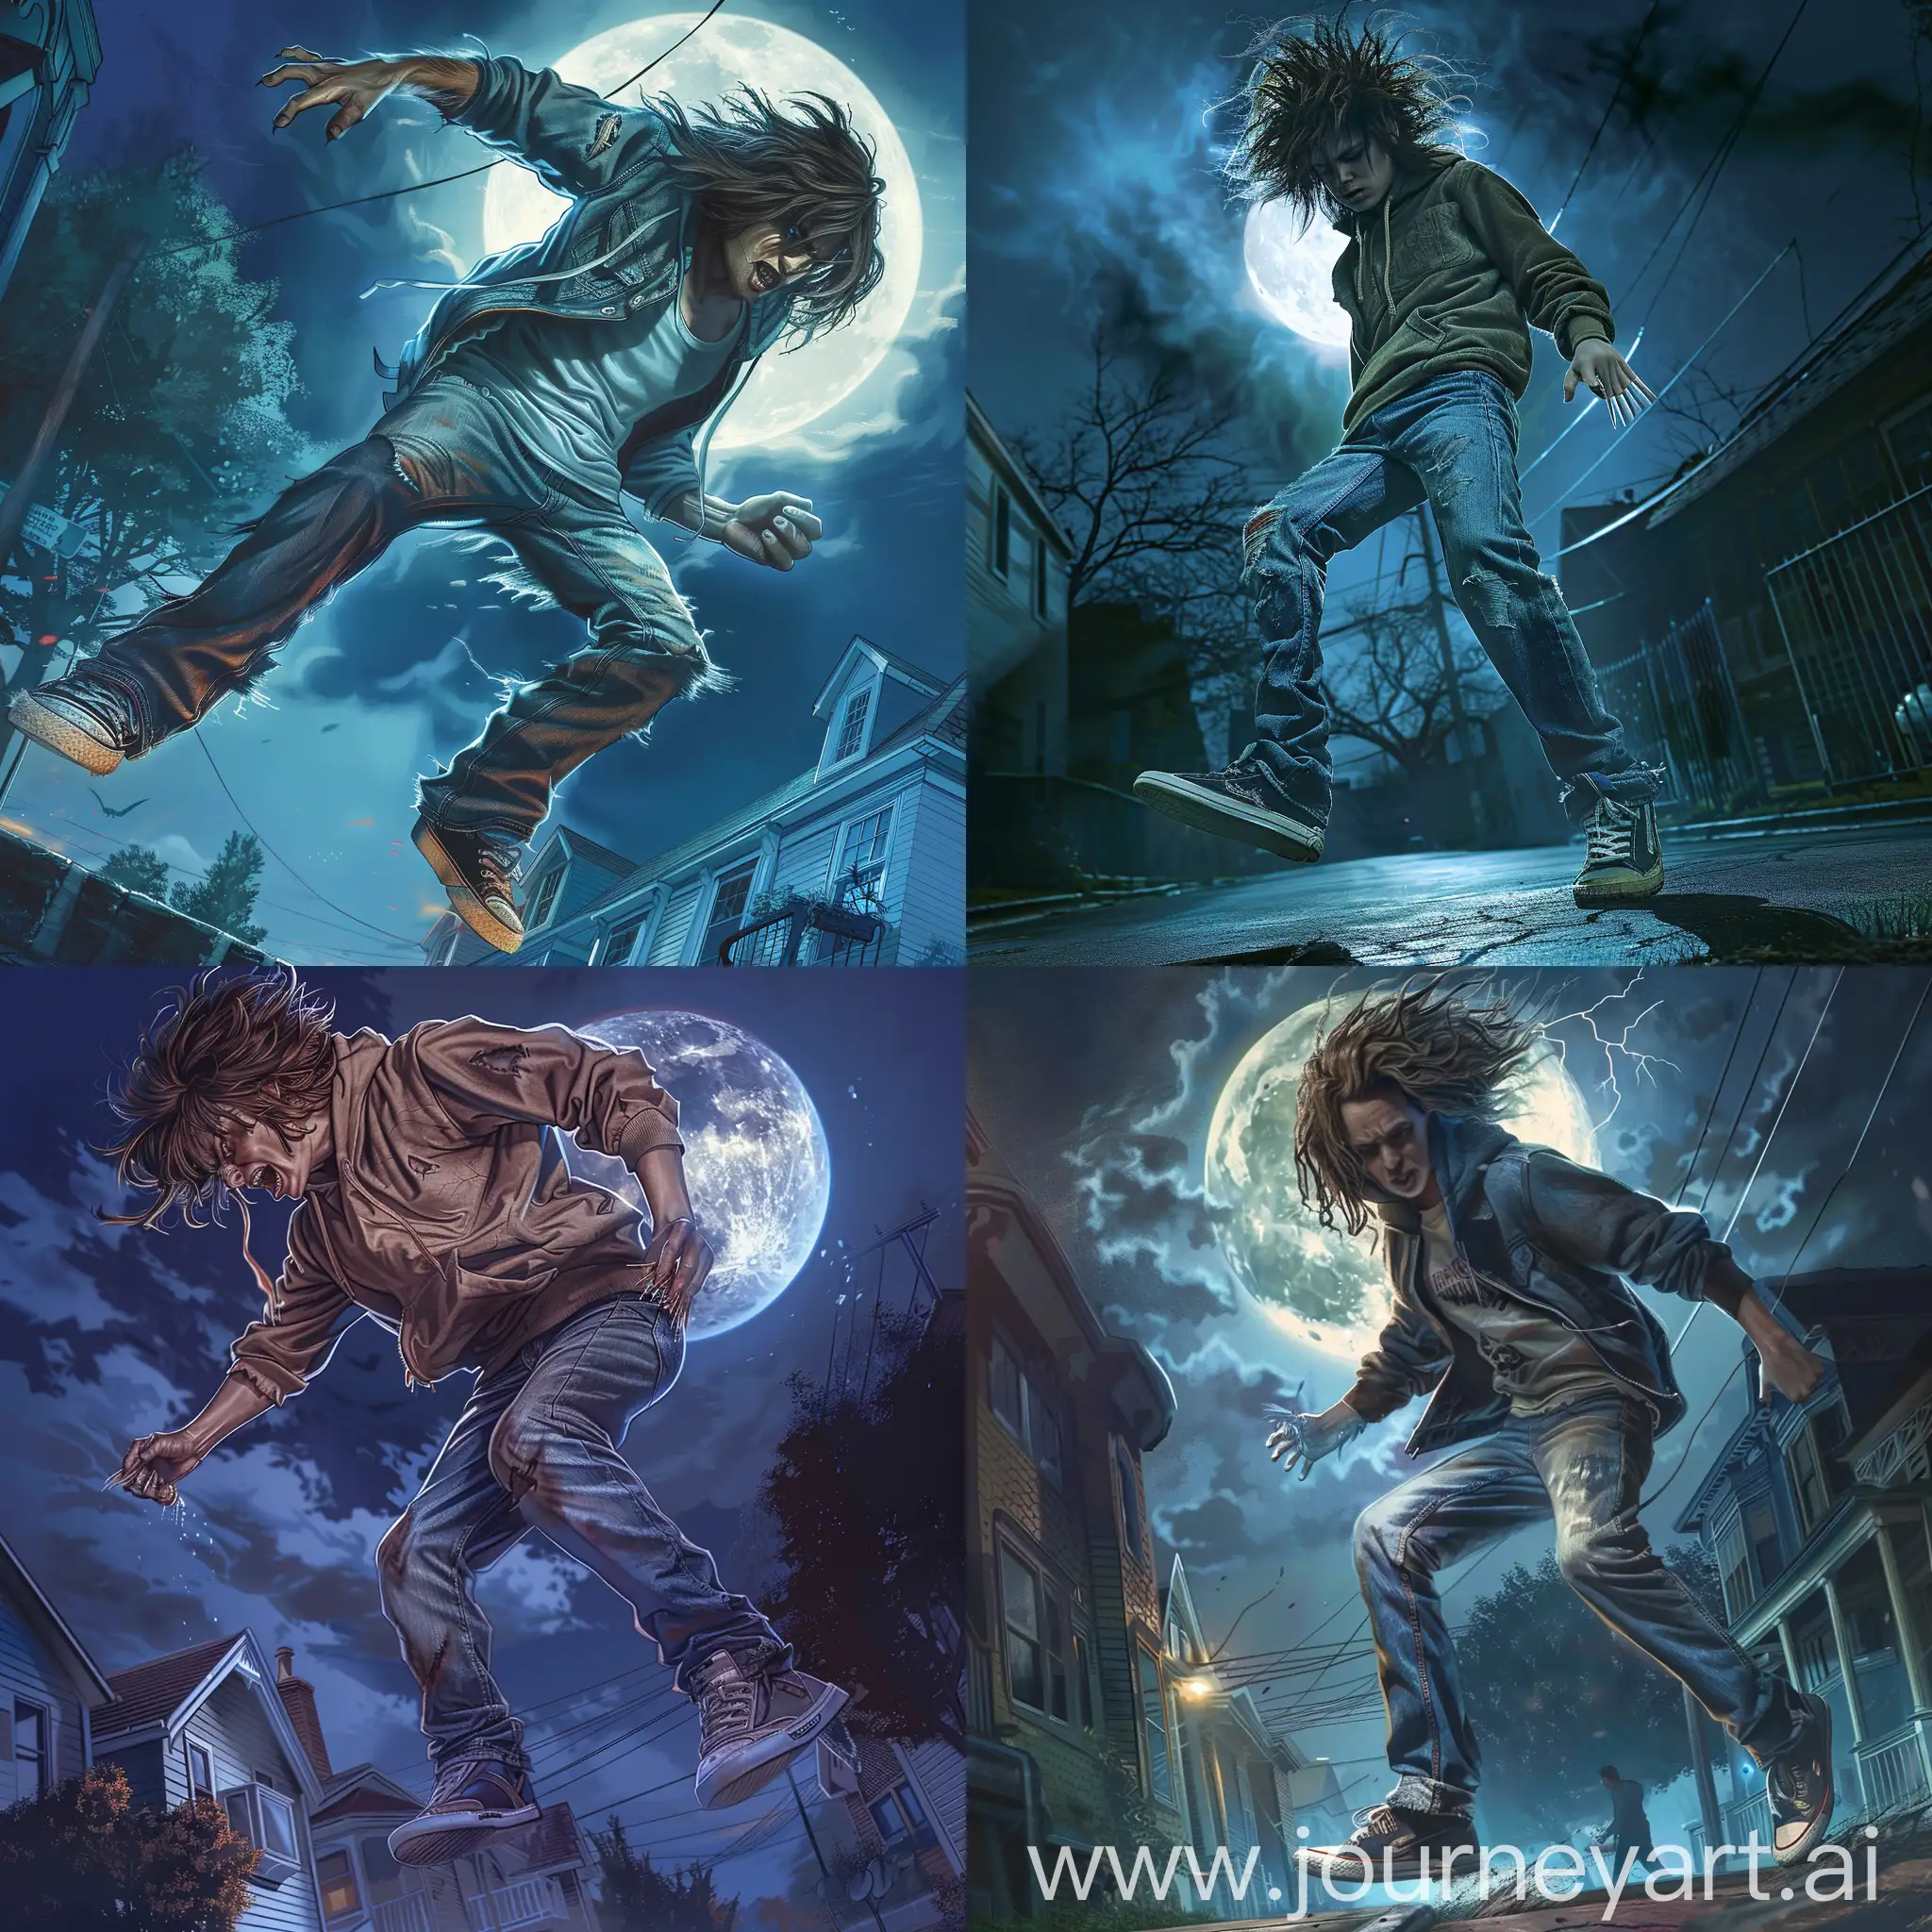 Create a hyper realistic image of a Clad in faded jeans, a hoodie, and sneakers, 16-year-old Ethan Miller traverses the moonlit streets of Oakwood, his tousled brown hair illuminated by the eerie glow of the full moon. Before he can react, searing pain courses through him as a werewolf sharp fangs pierce in his flesh, a grim reminder of the dangers lurking in the darkness of the night.